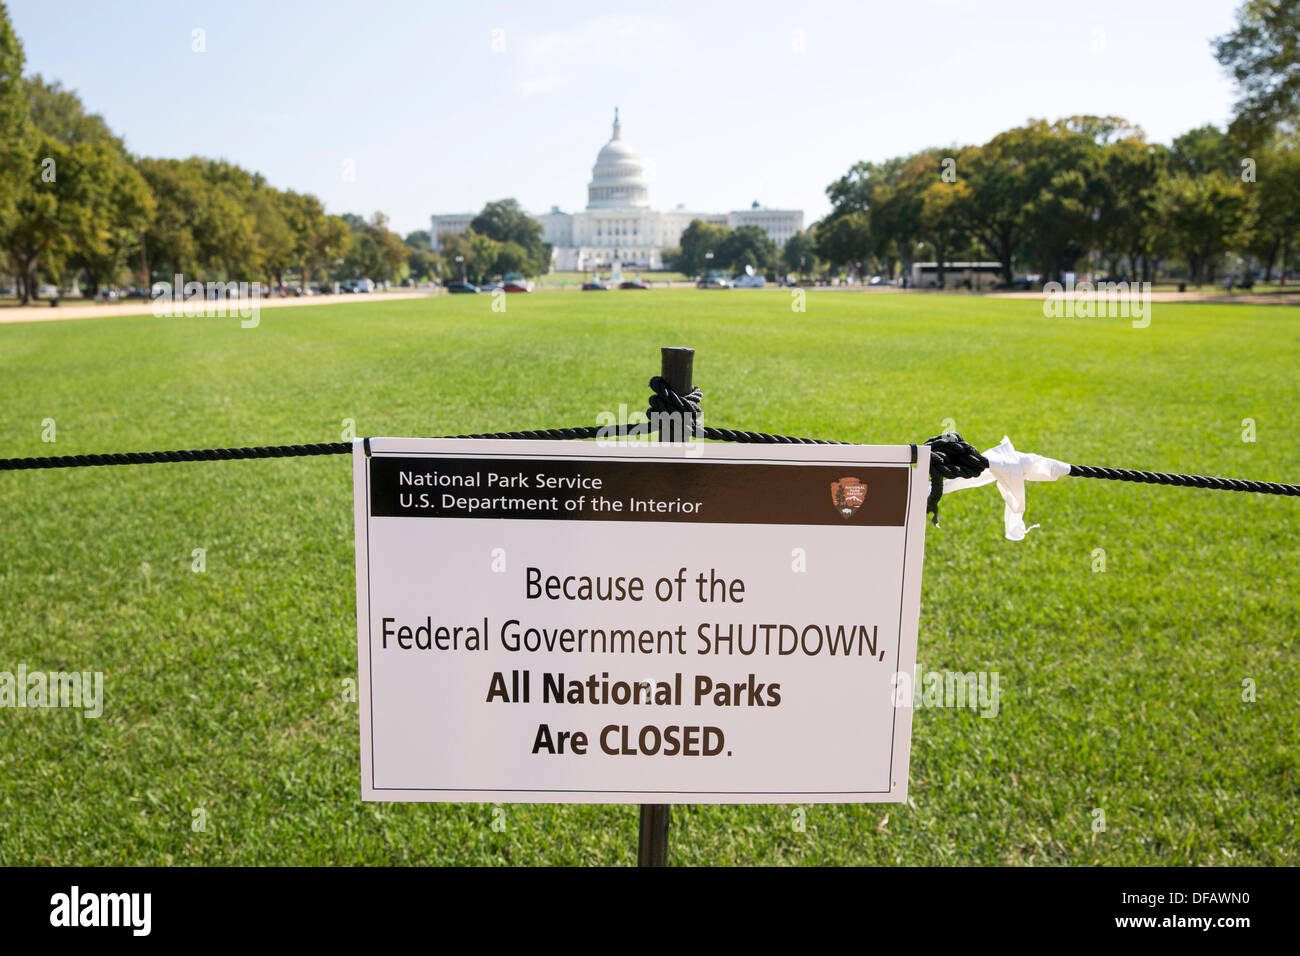 Washington DC, USA. 01st Oct, 2013. A portion of the National Mall with the United States Capitol Building in the background is closed due to the government shutdown on October 1, 2013 in Washington, DC. The US Federal Government shut down at midnight after Congress was unable to pass a funding bill over a dispute to defund Obamacare. Credit:  Kristoffer Tripplaar/Alamy Live News Stock Photo